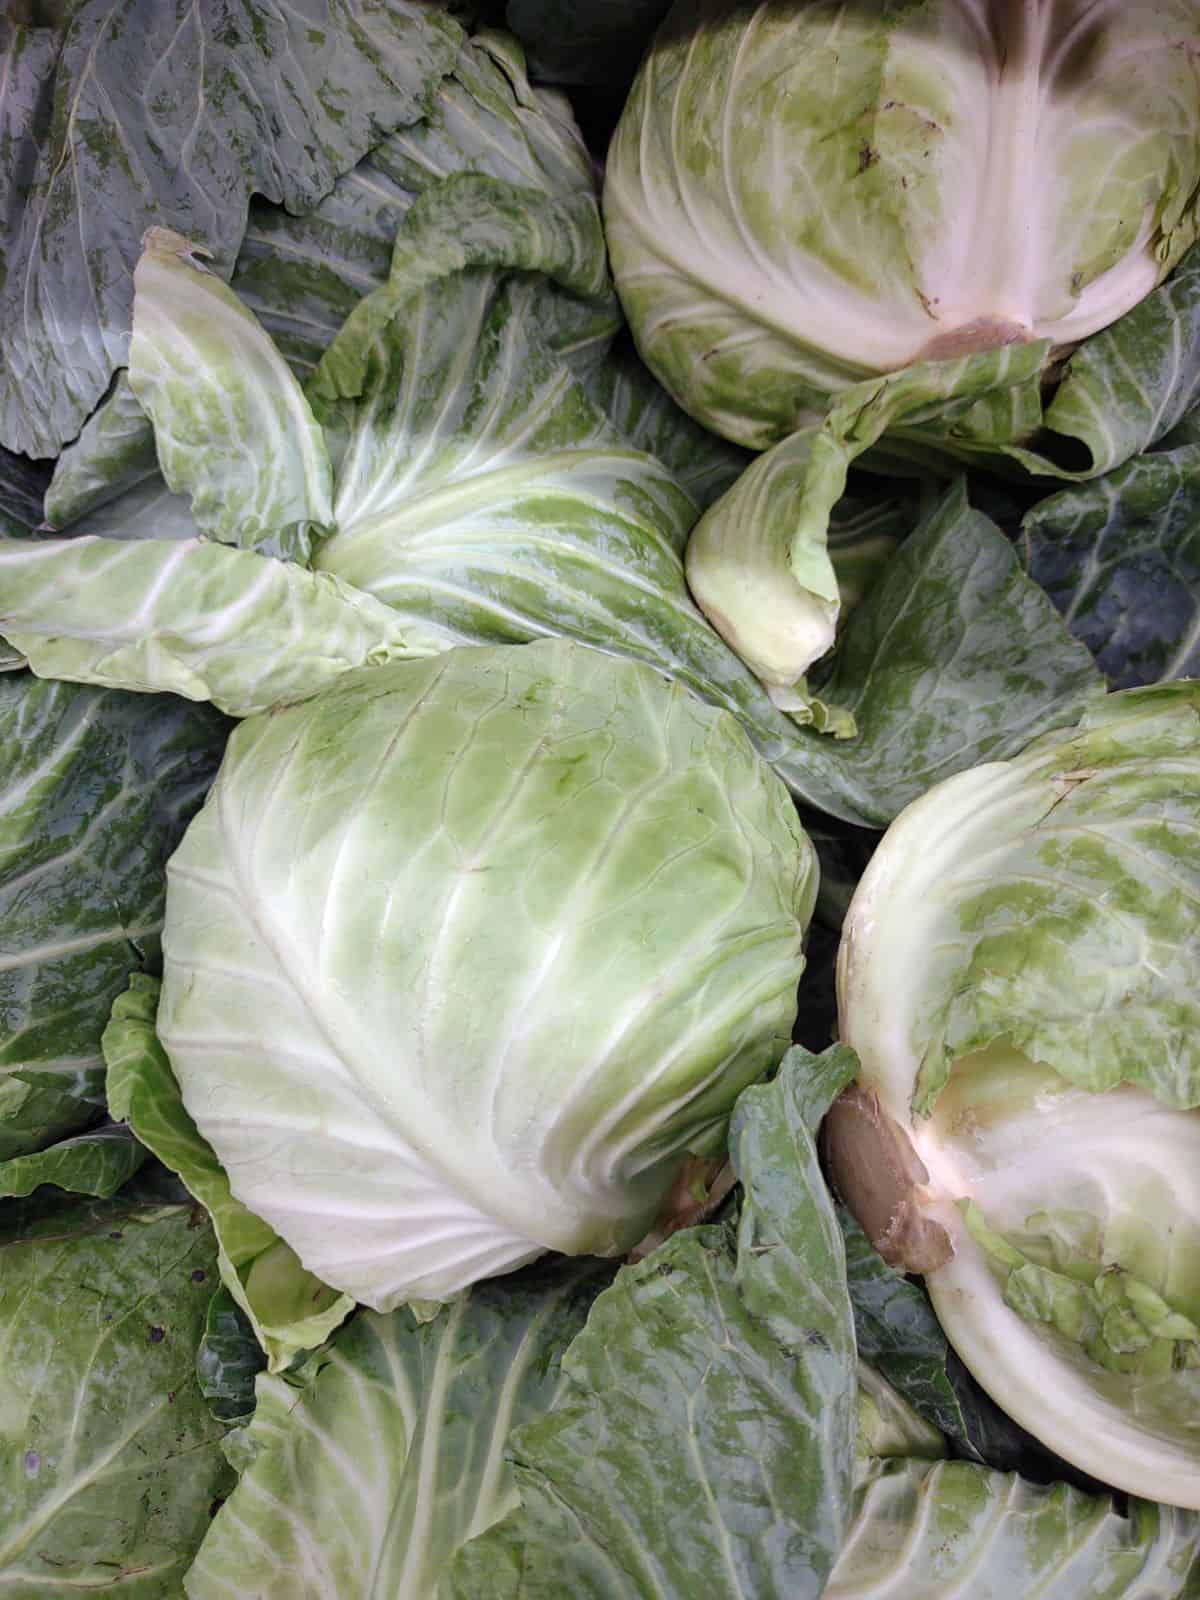 A close up of a display of green cabbage at an ALDI store.